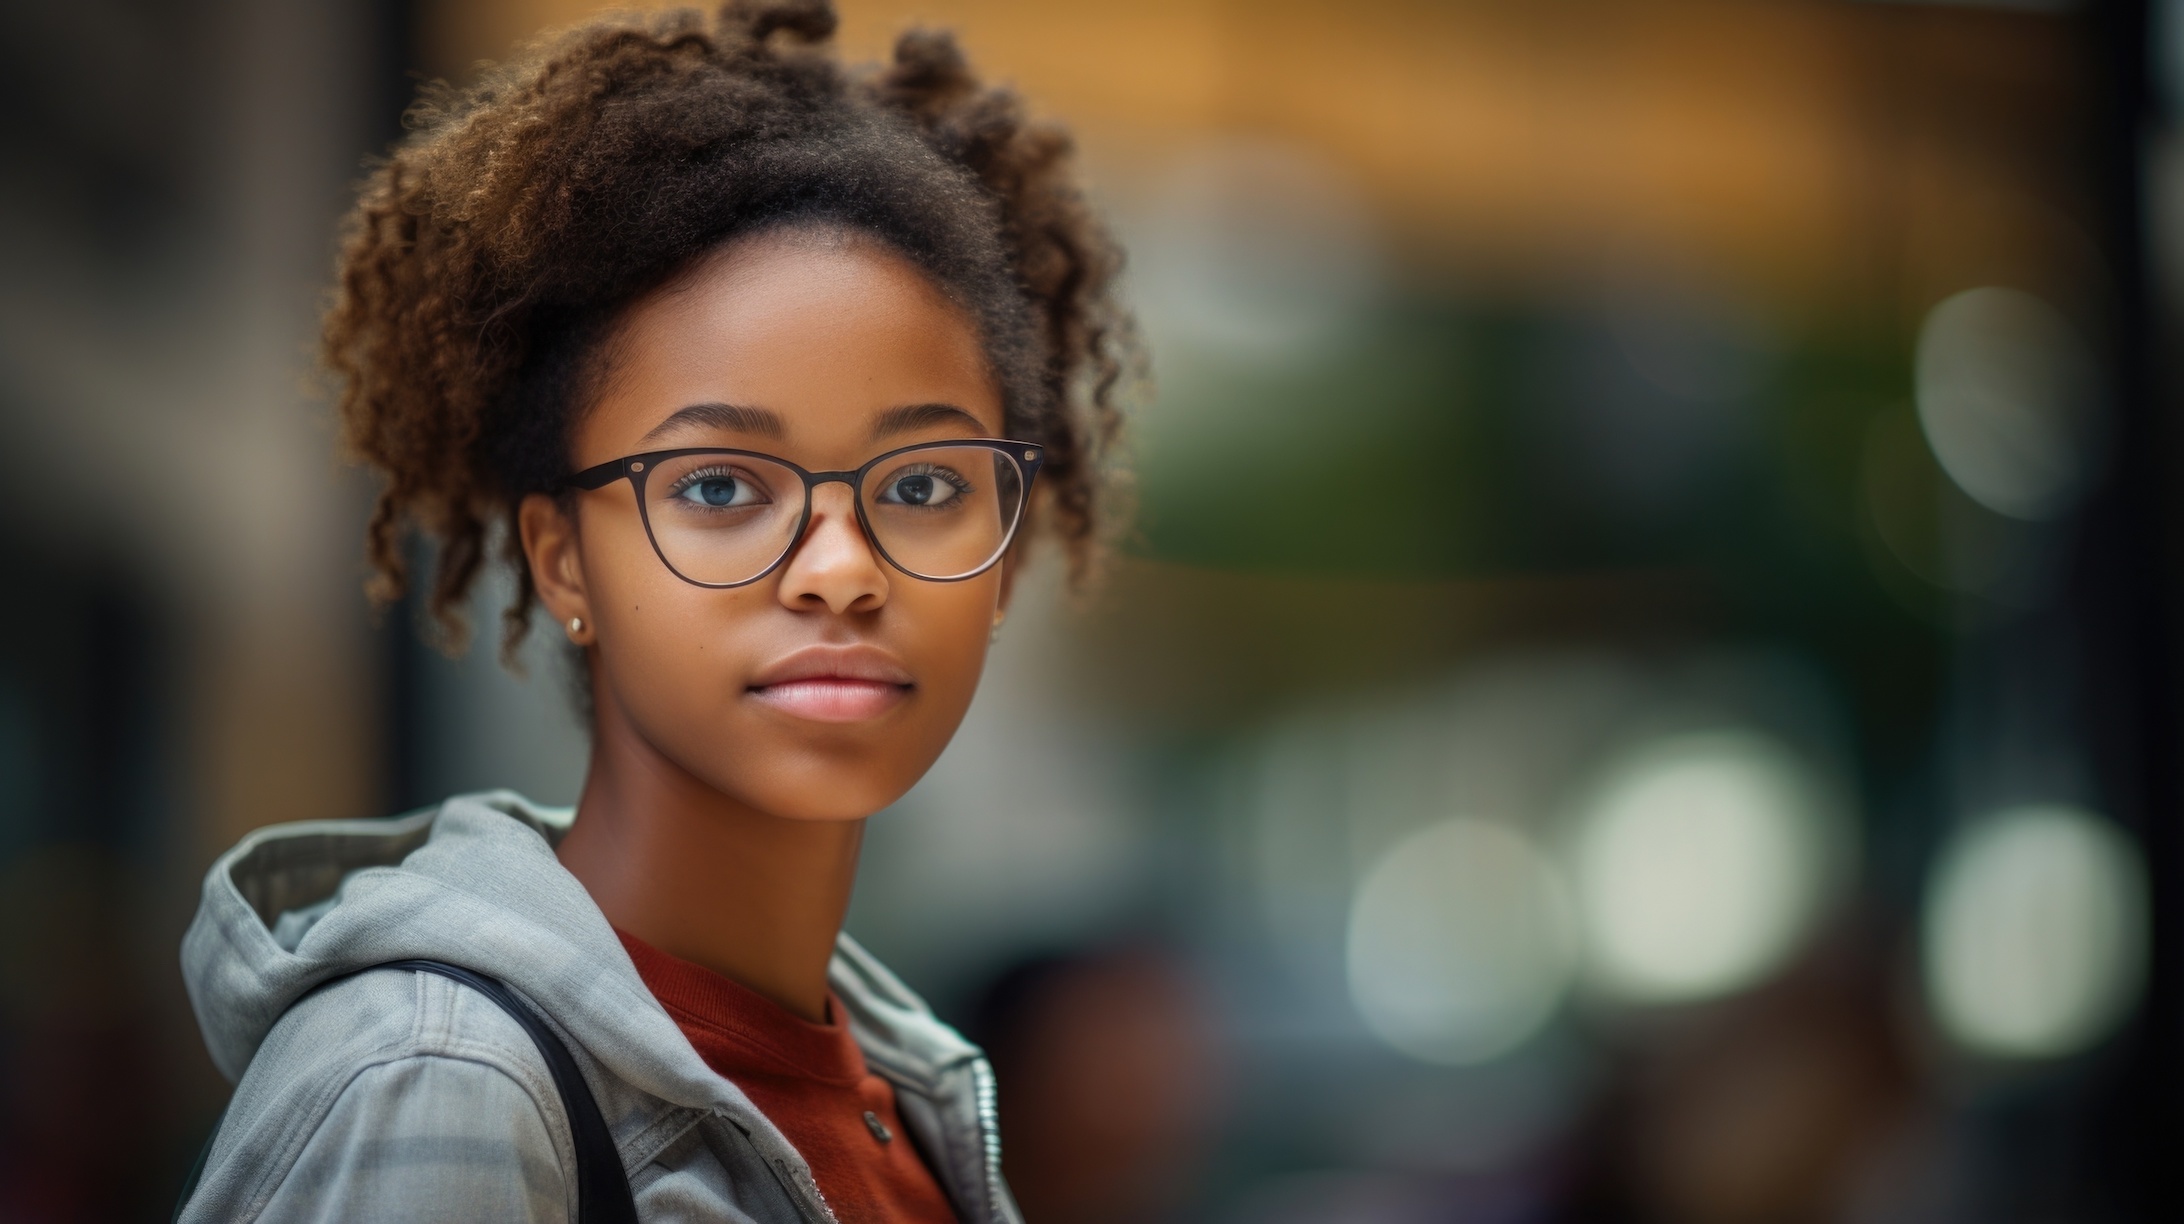 Black young woman with glasses looking interested